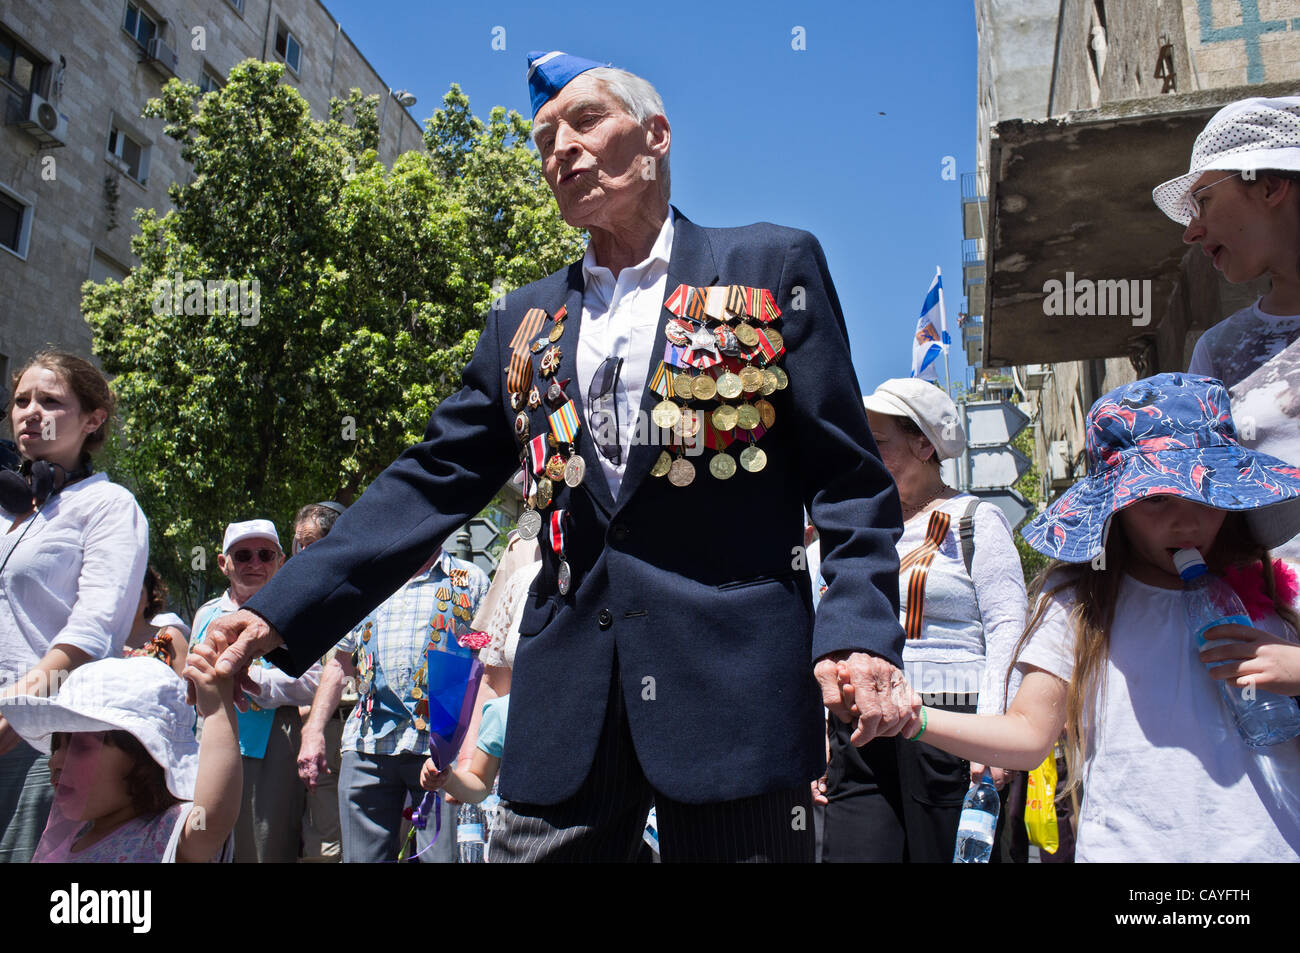 World War Two veteran marches with granddaughters celebrating Allied victory over Nazi Germany. Jerusalem, Israel. 9-May-2012. Stock Photo